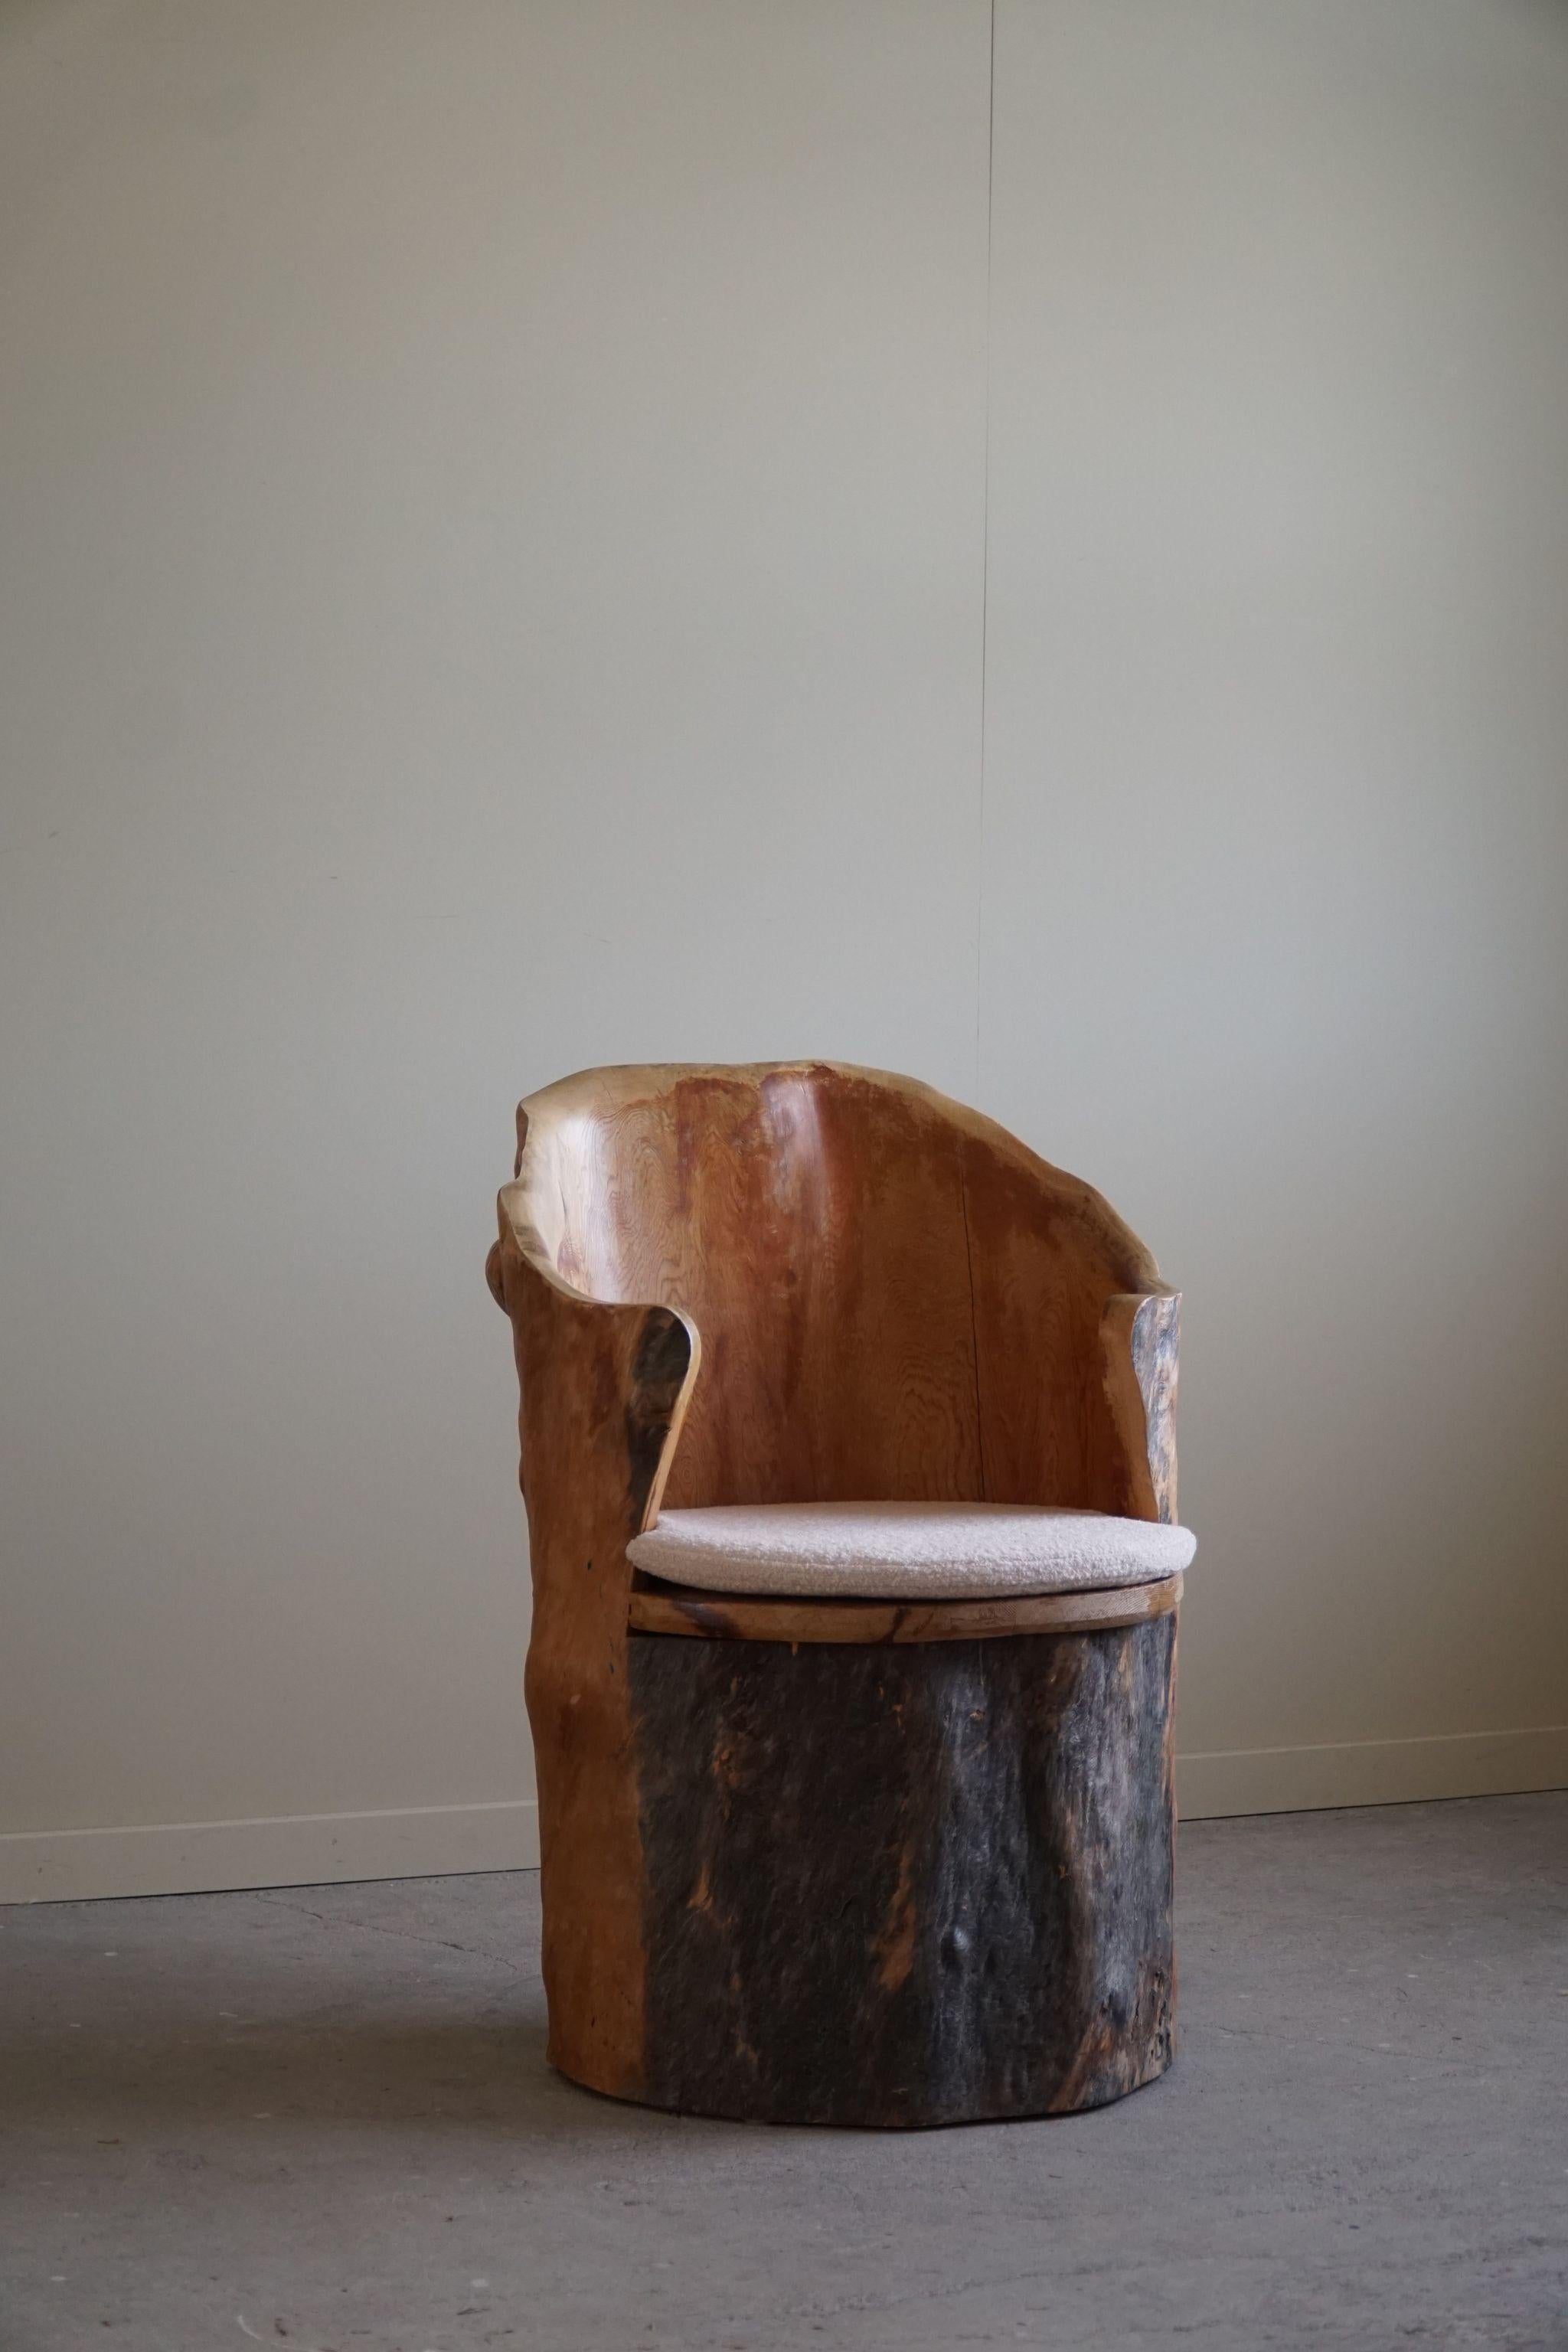 Hand-Carved Brutalist Stump Chair in Solid Pine, Wabi Sabi Style, Swedish, 1970s For Sale 9